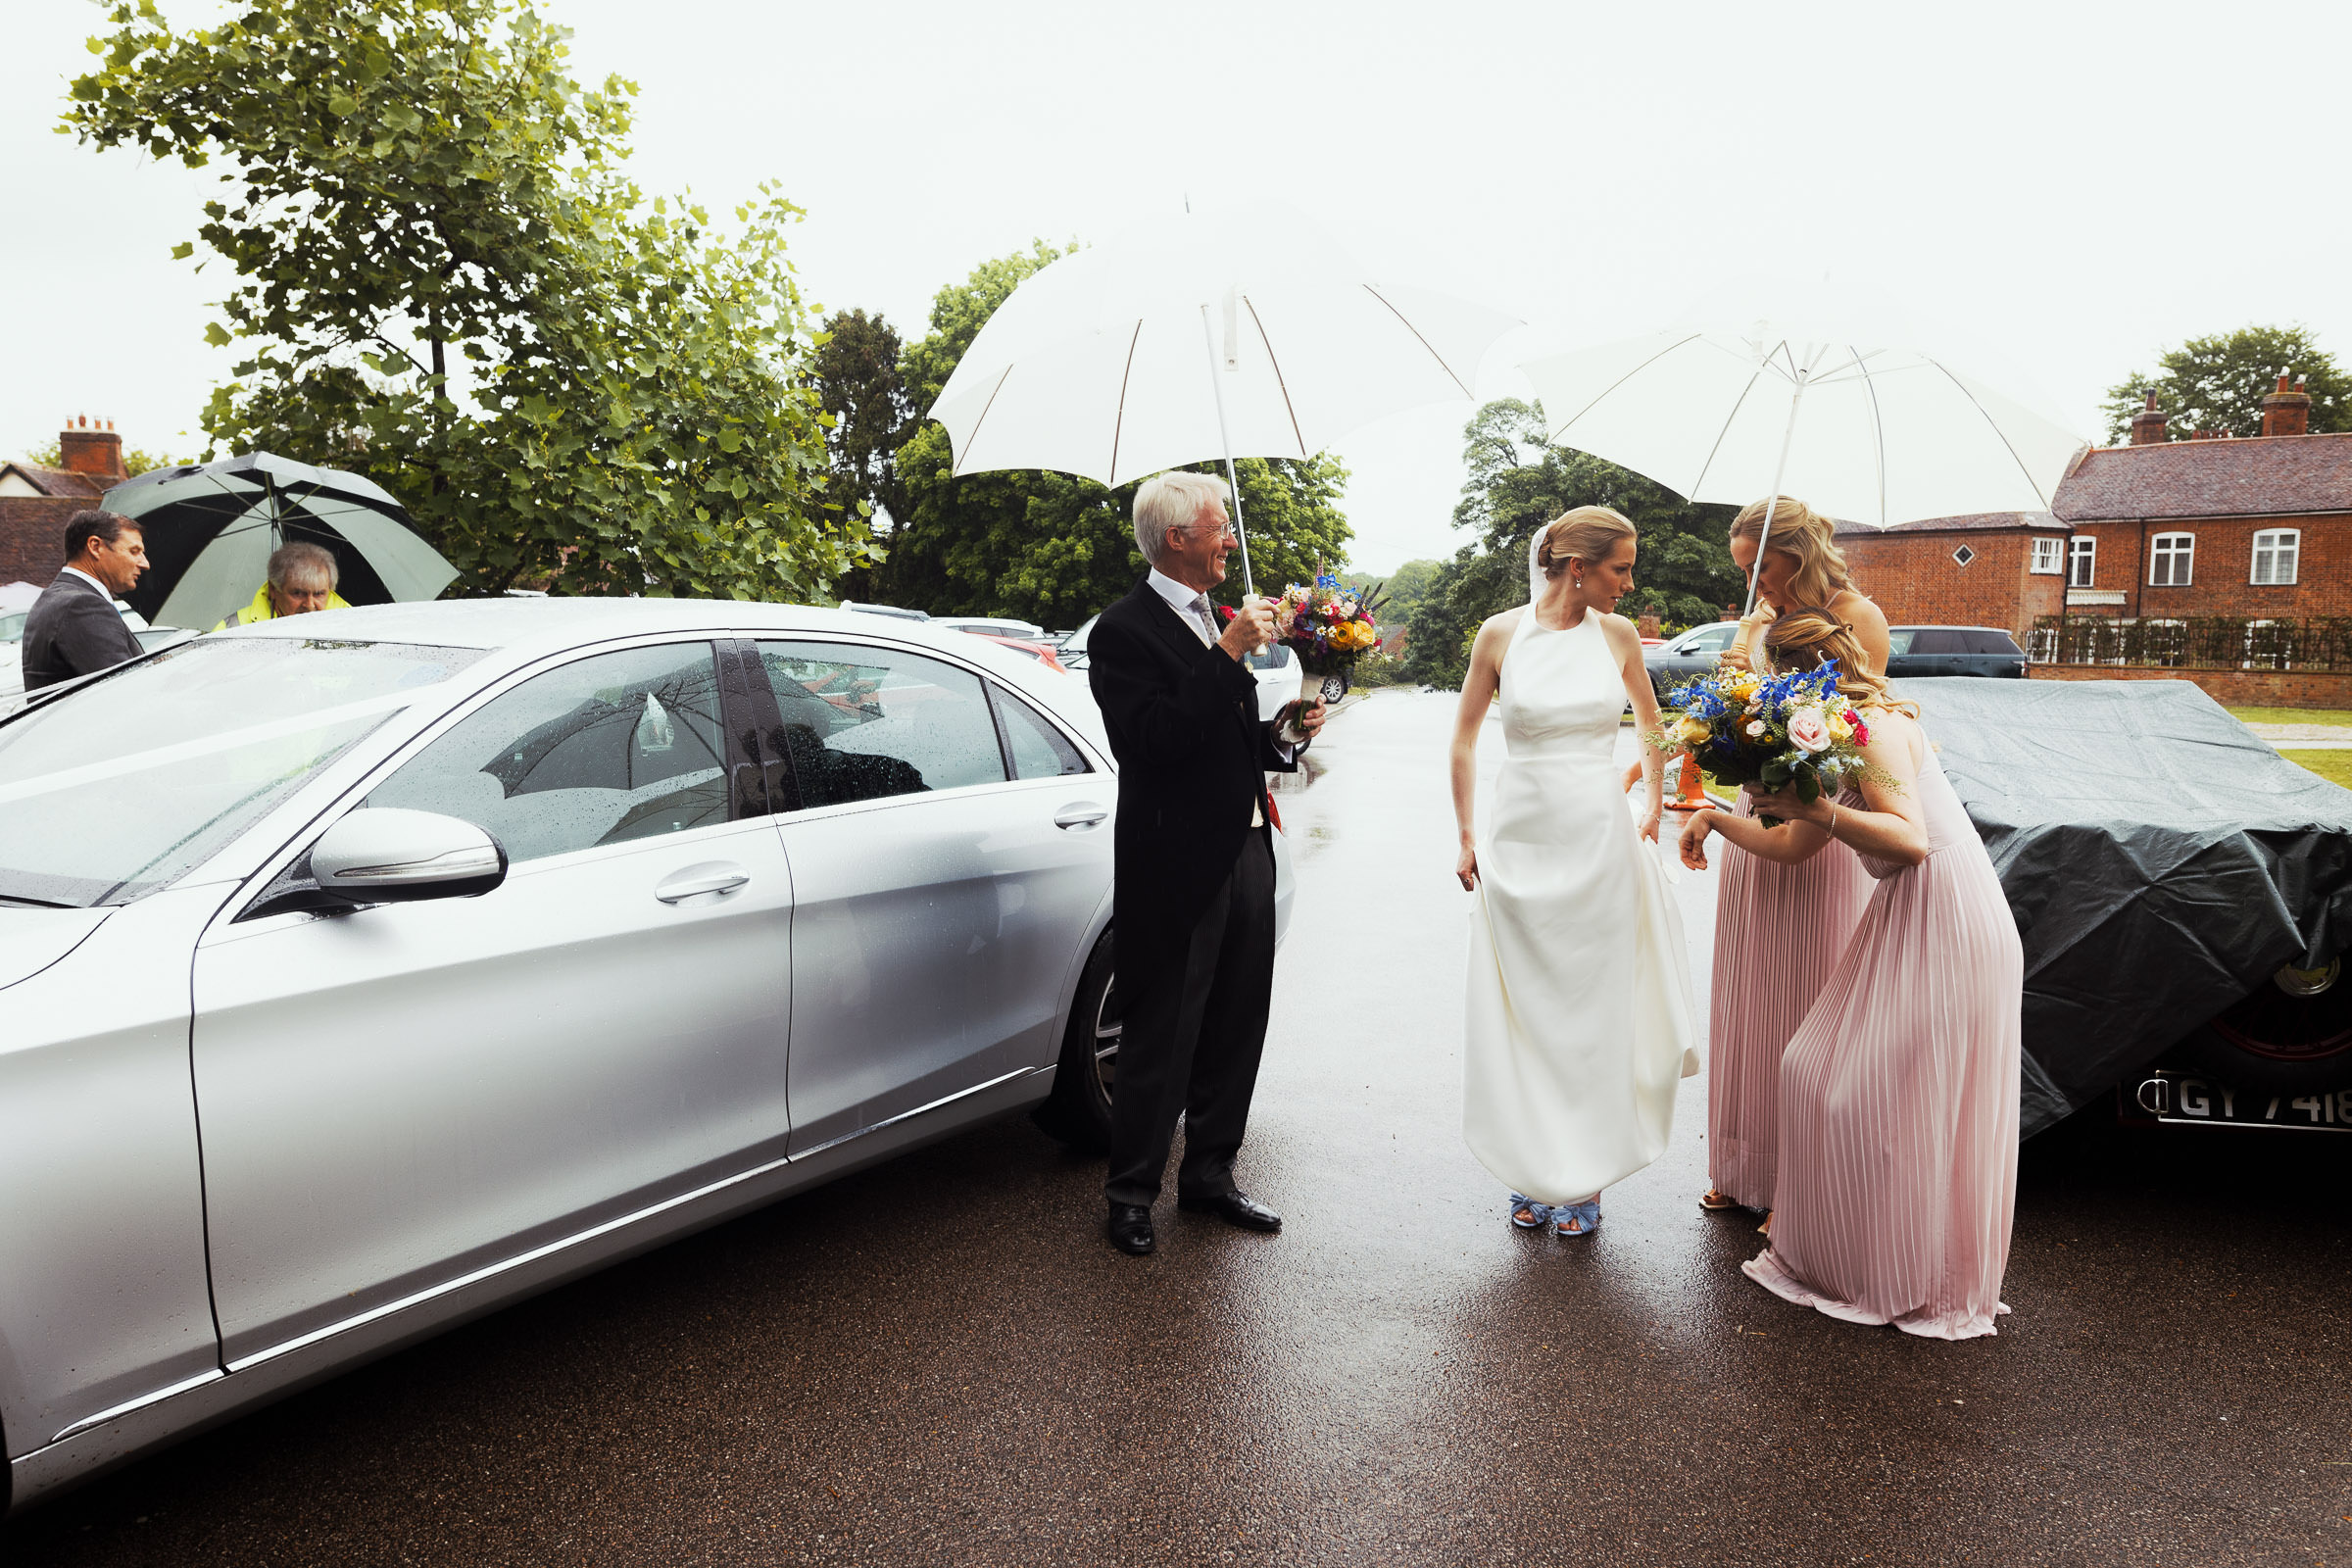 Bride in Jesus Peiro 260 dress from Miss Bush stands outside church in rainy Danbury, Essex. Dad and bridesmaid hold umbrella. Captured by documentary-style Essex wedding photographer from South Woodham Ferrers